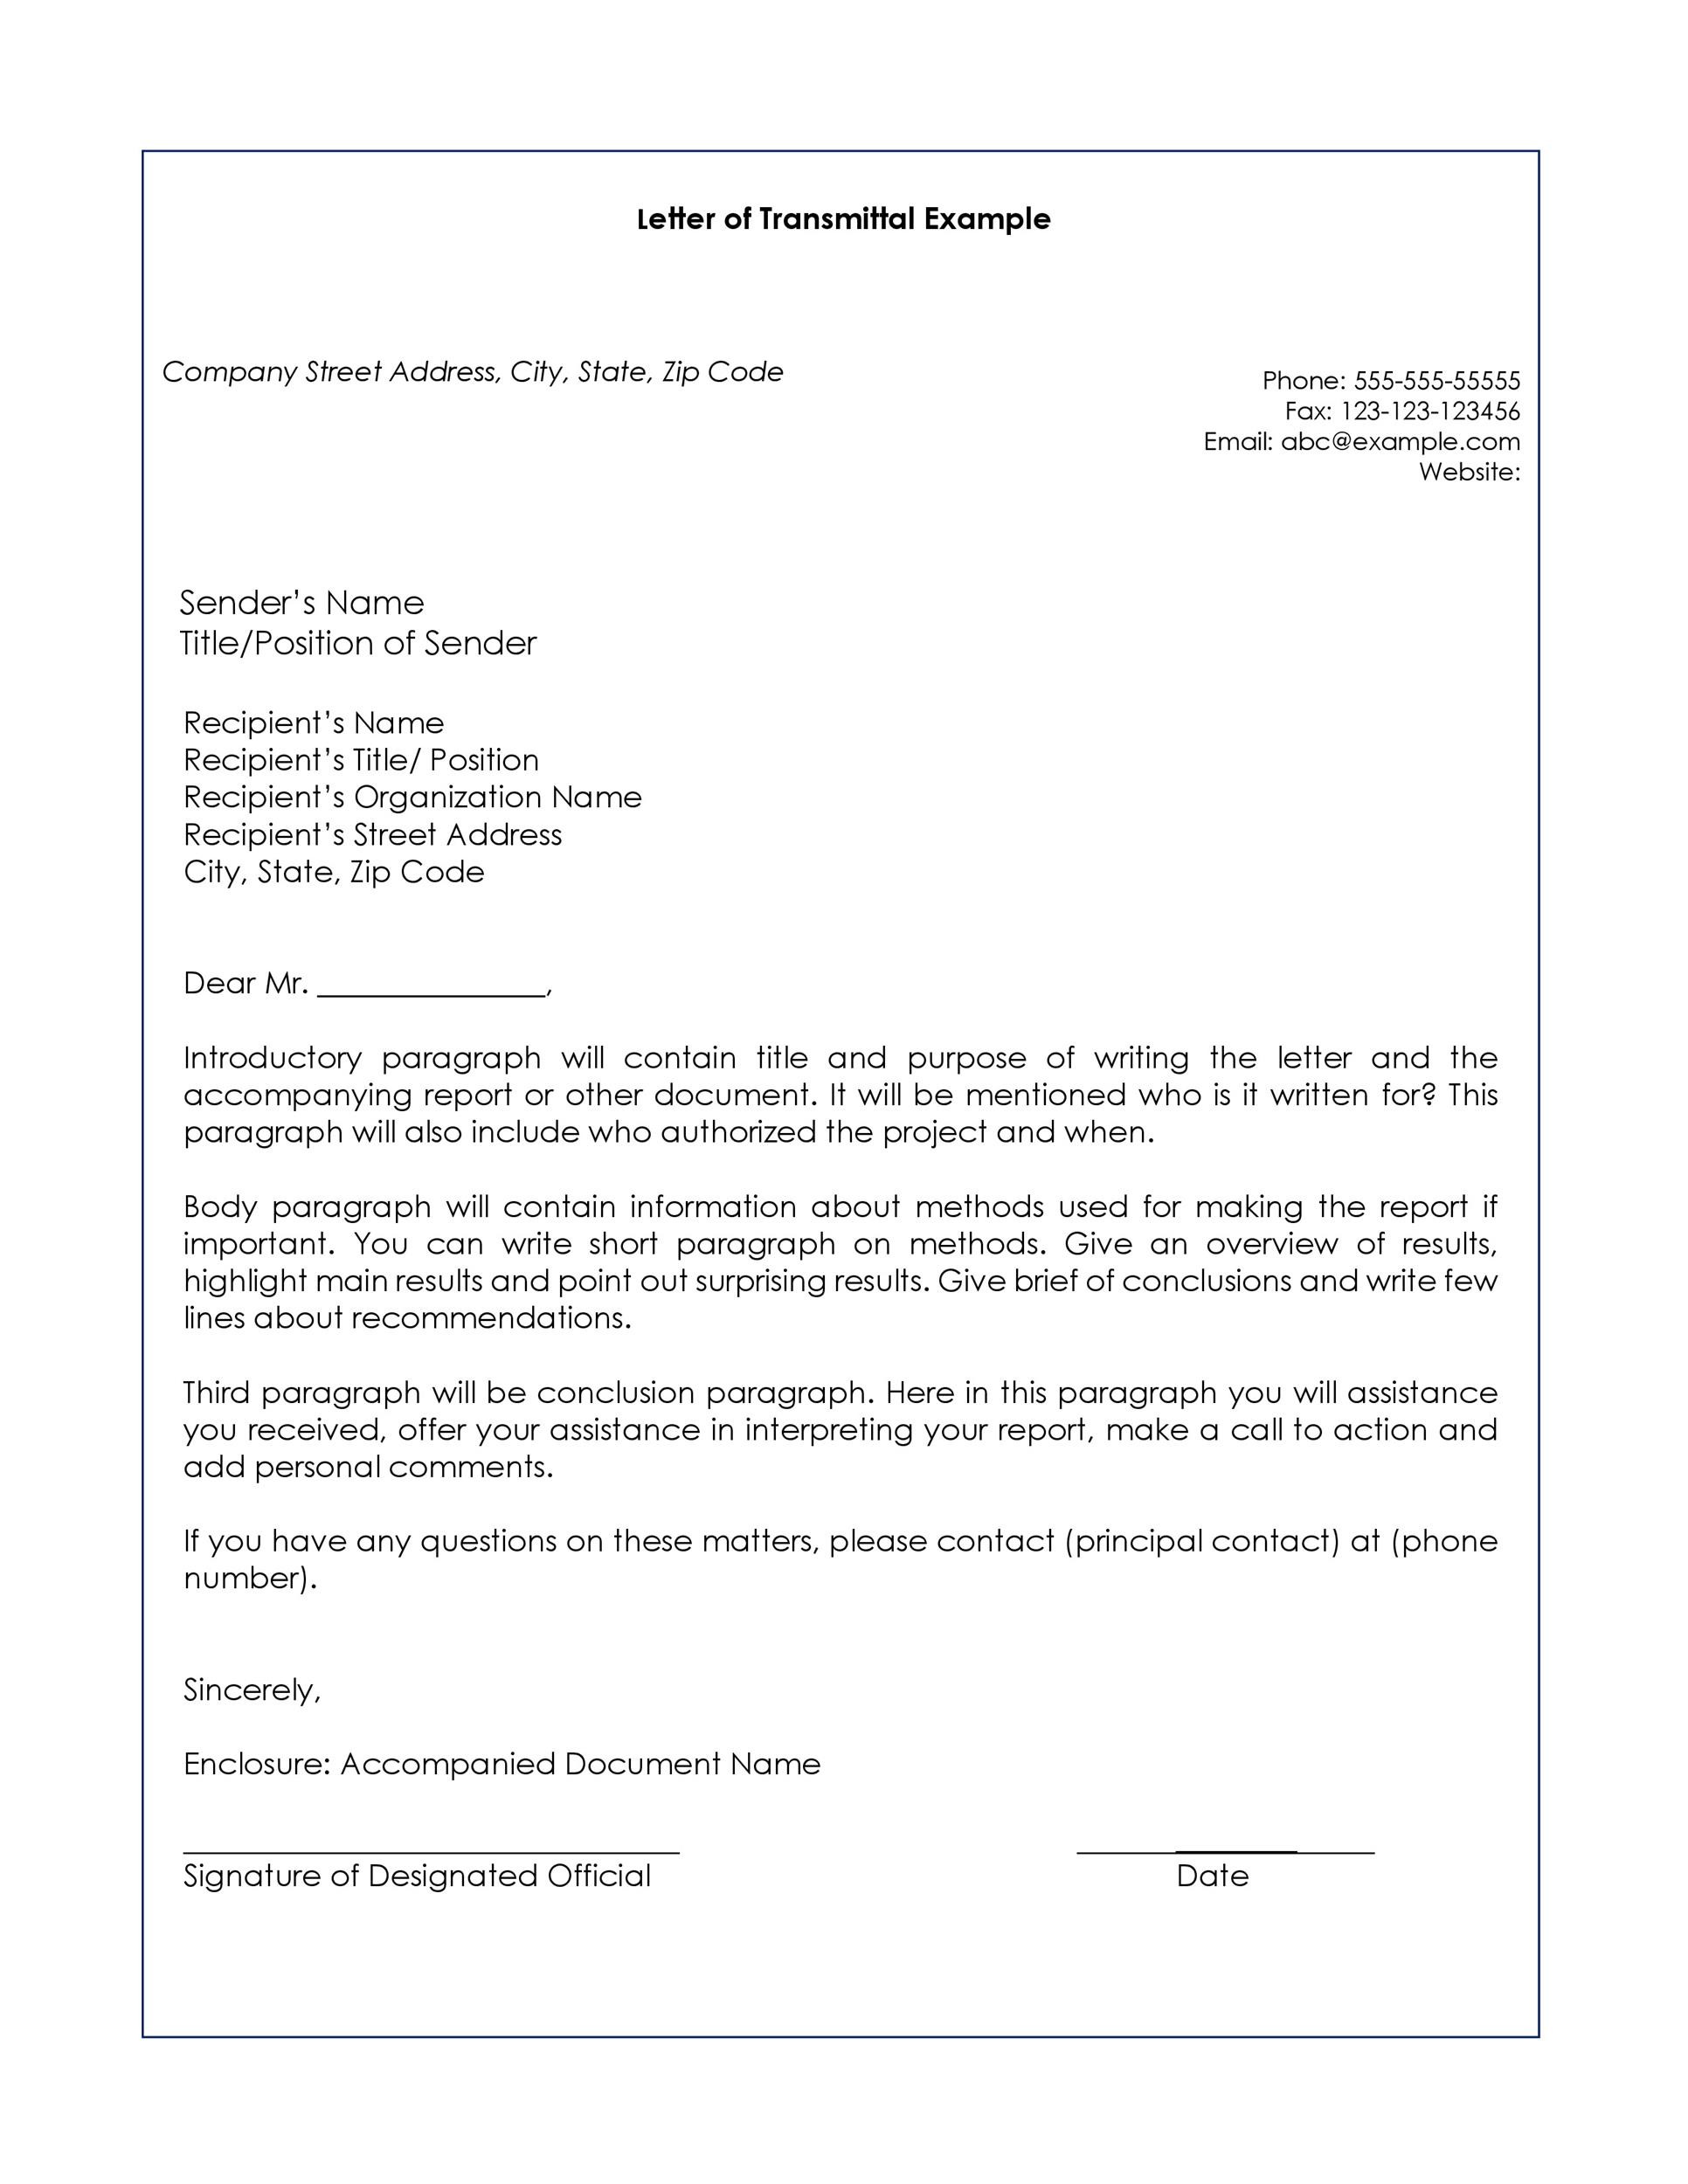 Free letter of transmittal template 08